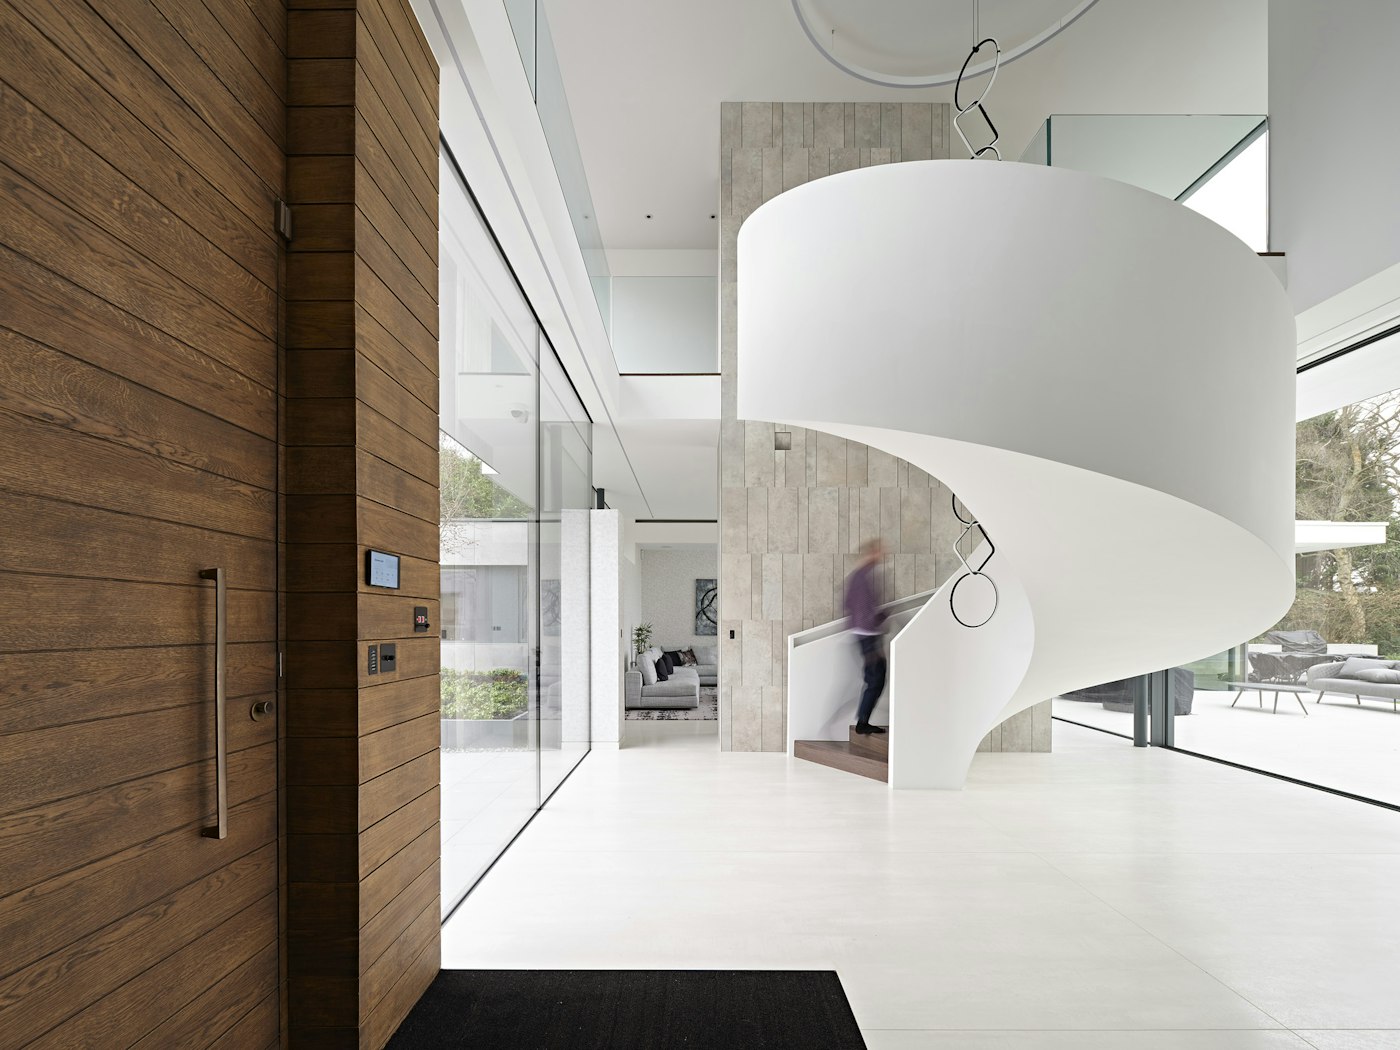 The entrance hall features a sweeping, spiral staircase